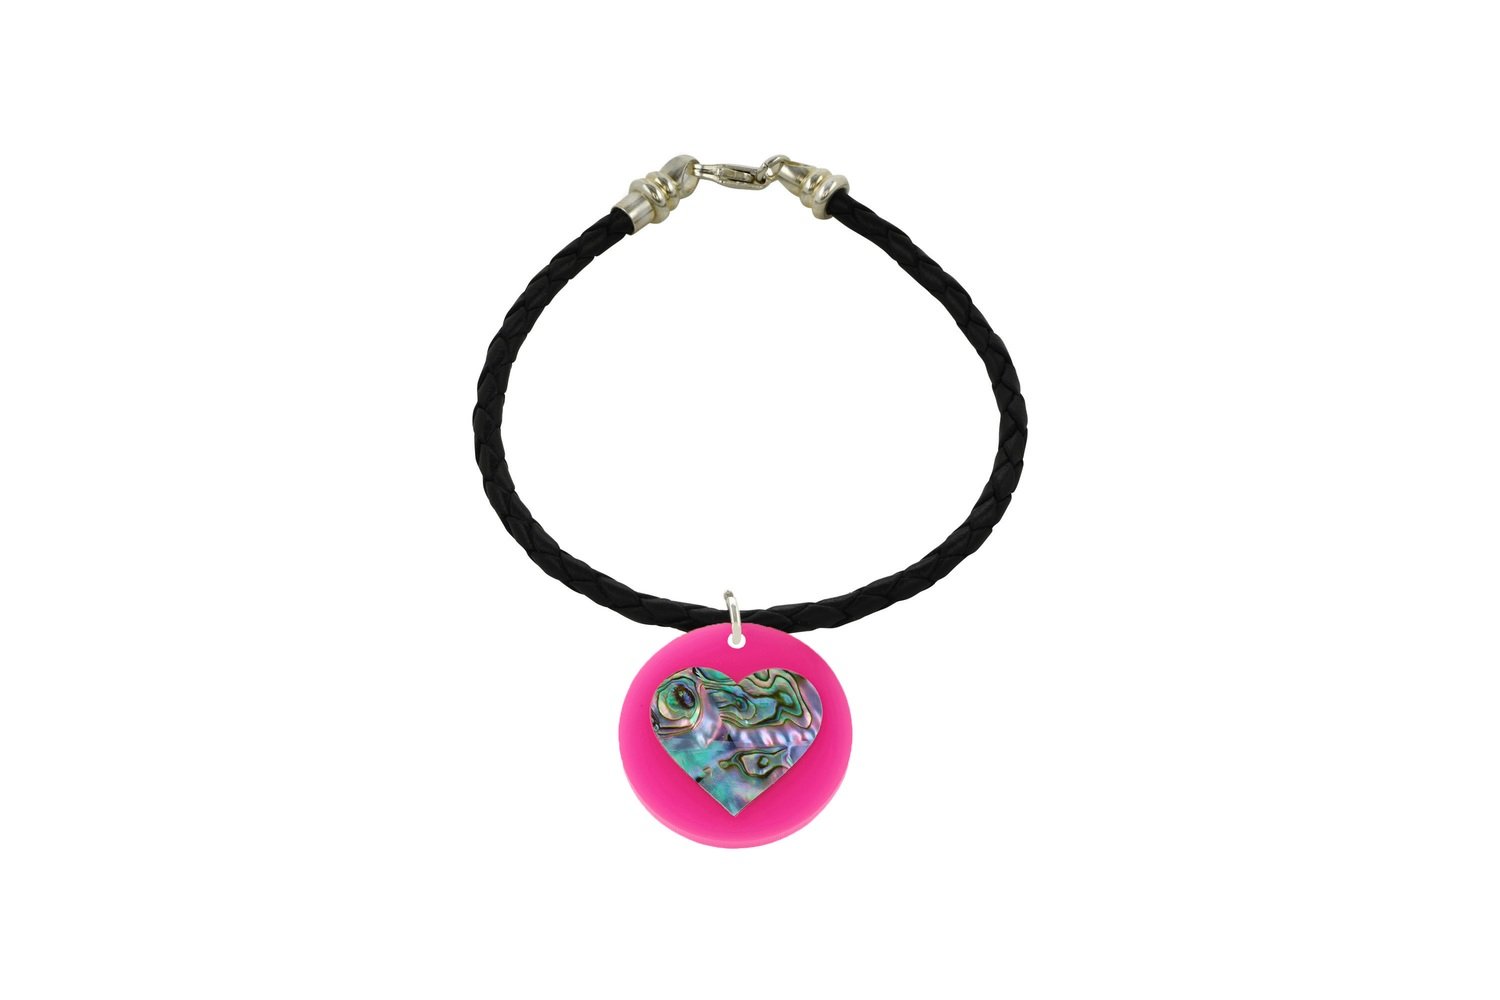 Mother of Pearl Heart with Decorative Braided Leather Cord Bracelet